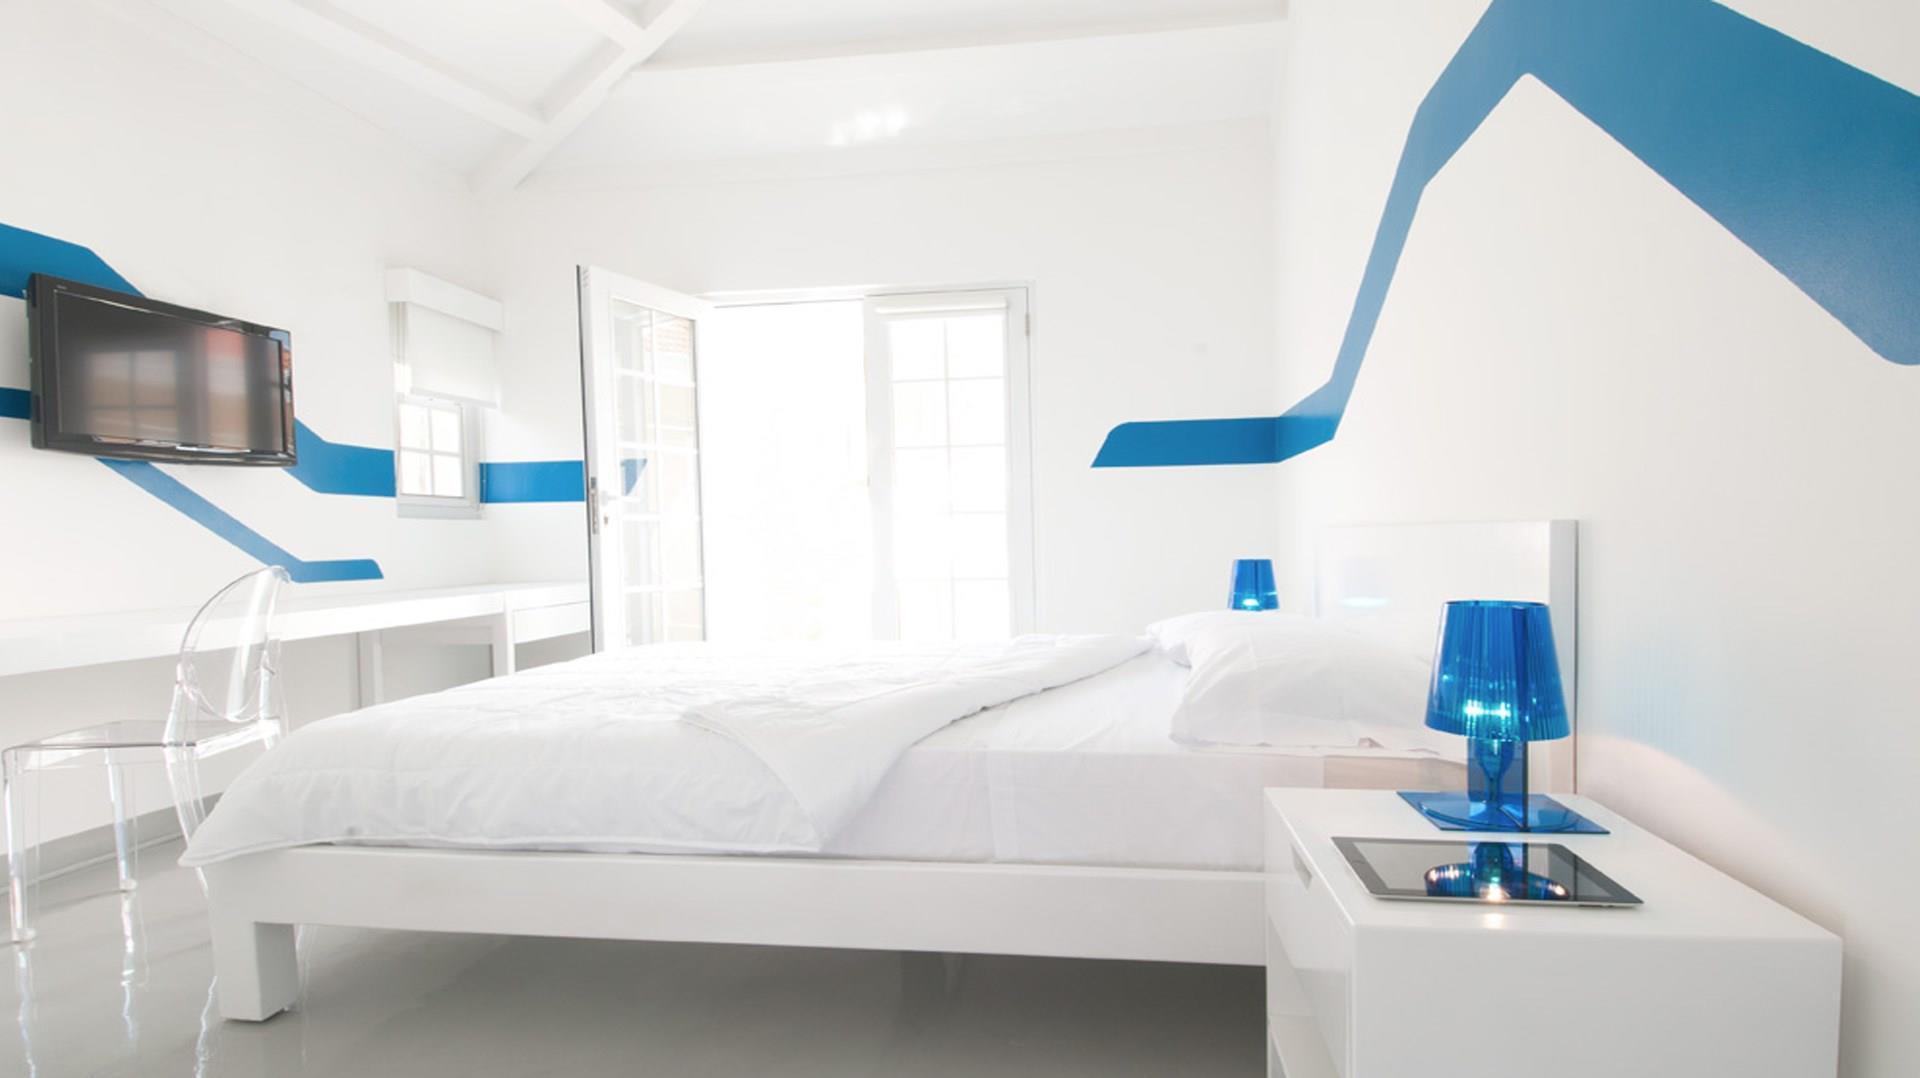 Wave Hotel & Cafe Curacao in Willemstad, CW